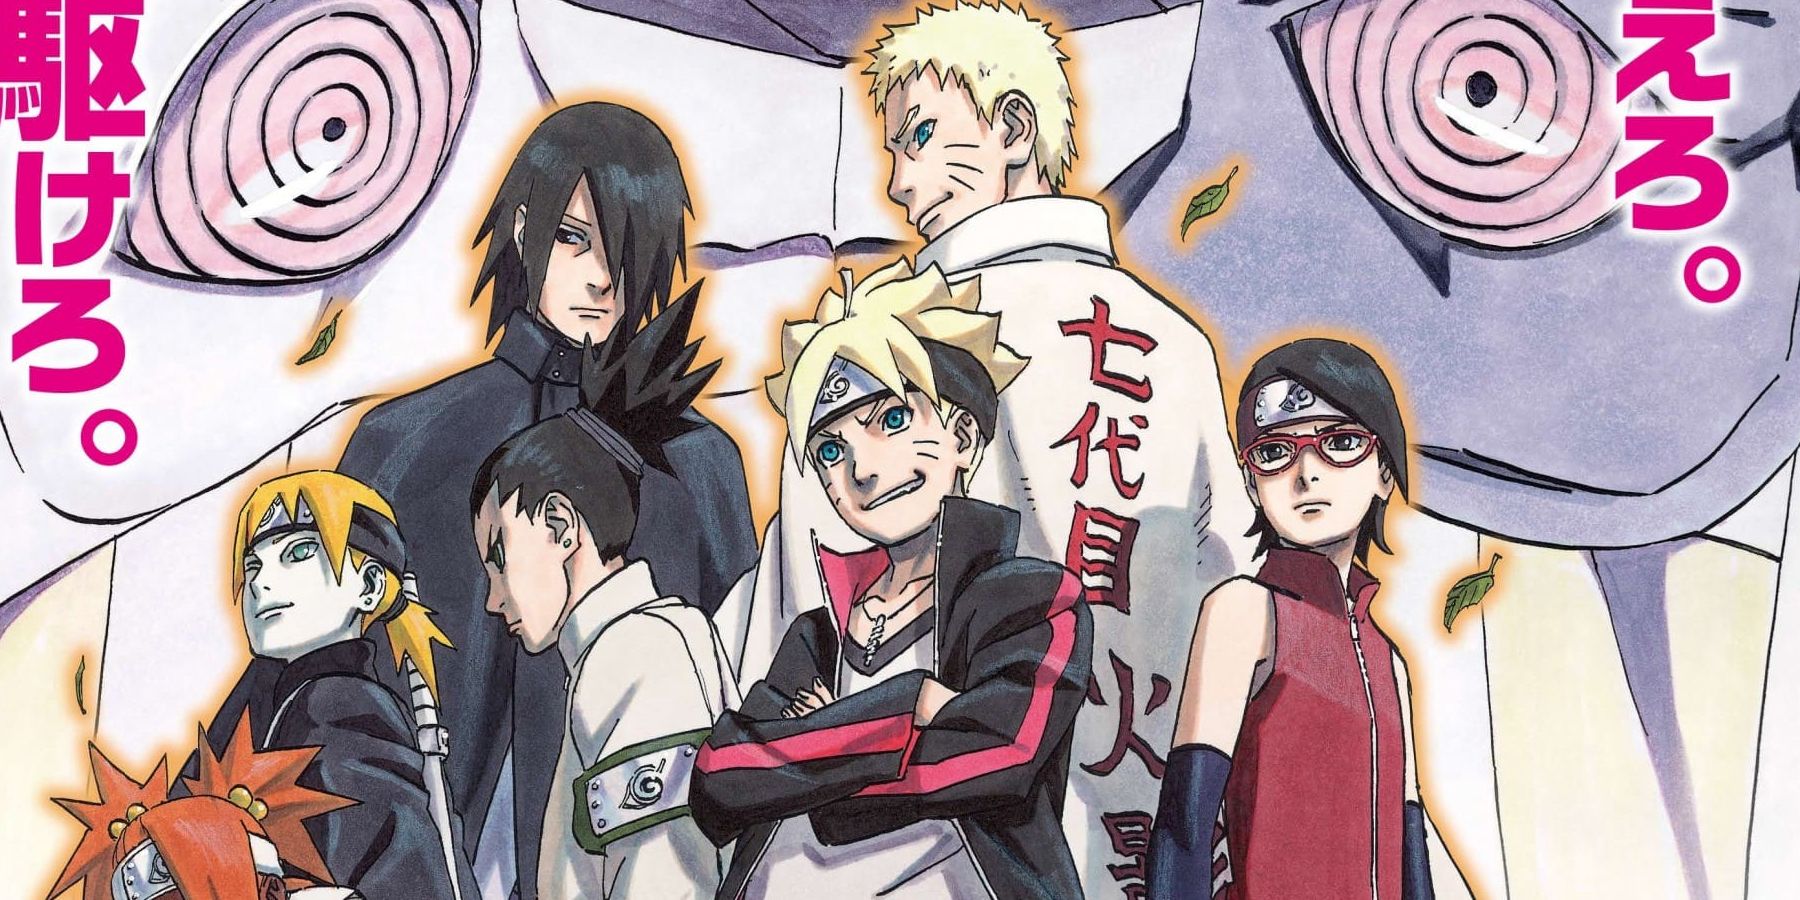 The Boruto characters in an anime style poster for the movie